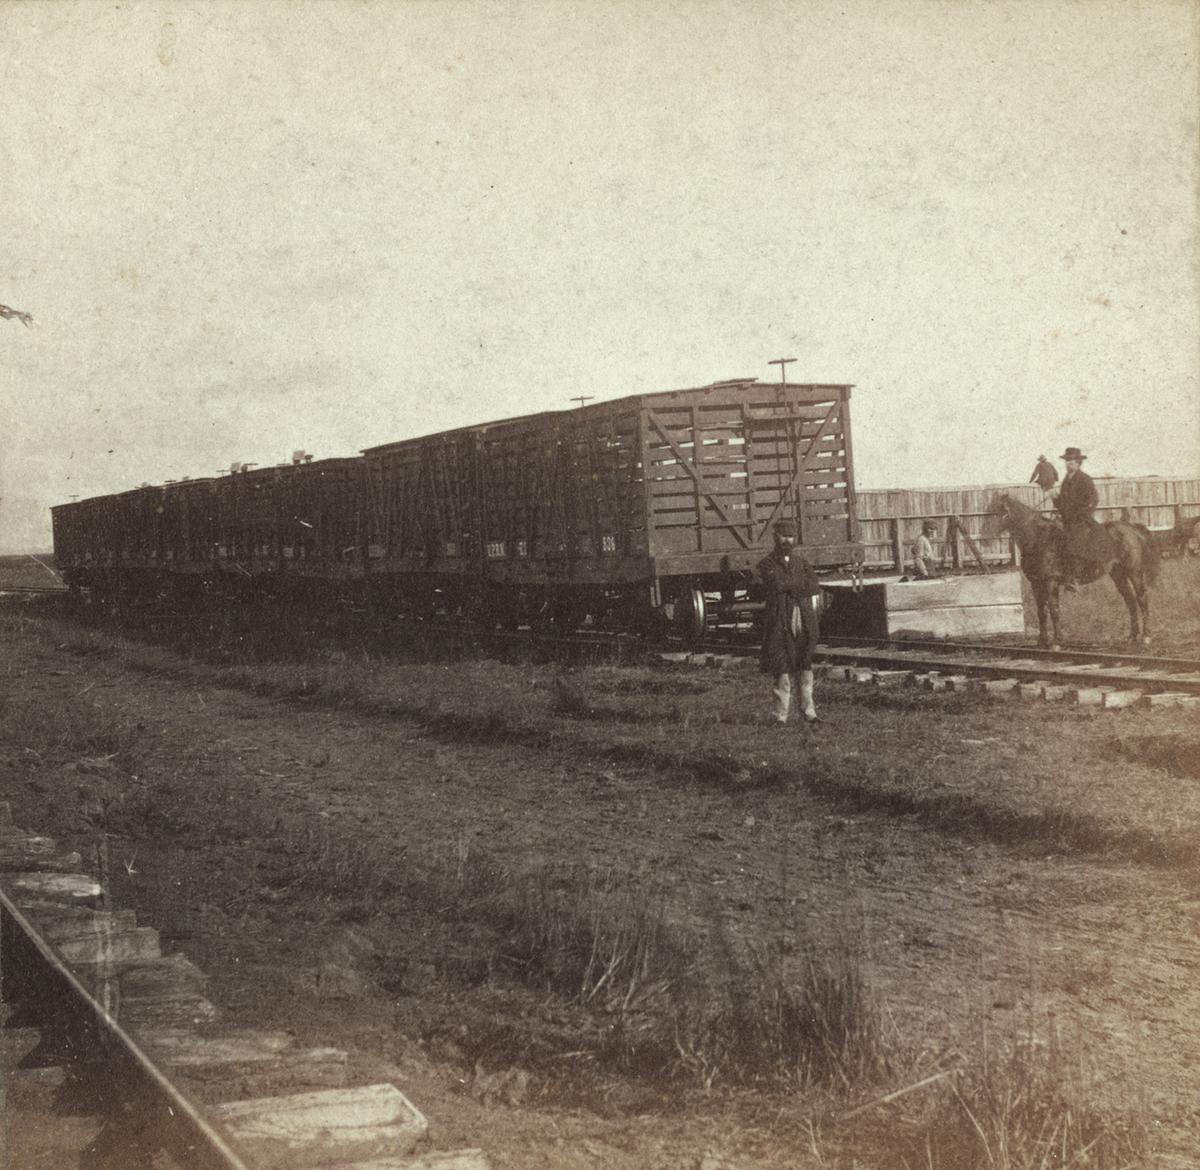 One of the first Western railheads allowing cattle to be shipped to eastern markets was located at Abilene, Kansas. The cattle trade provided the route for the song "Home on the Range" to be spread among western states by cowboys who learned it in Kansas. Library of Congress. (Public Domain)